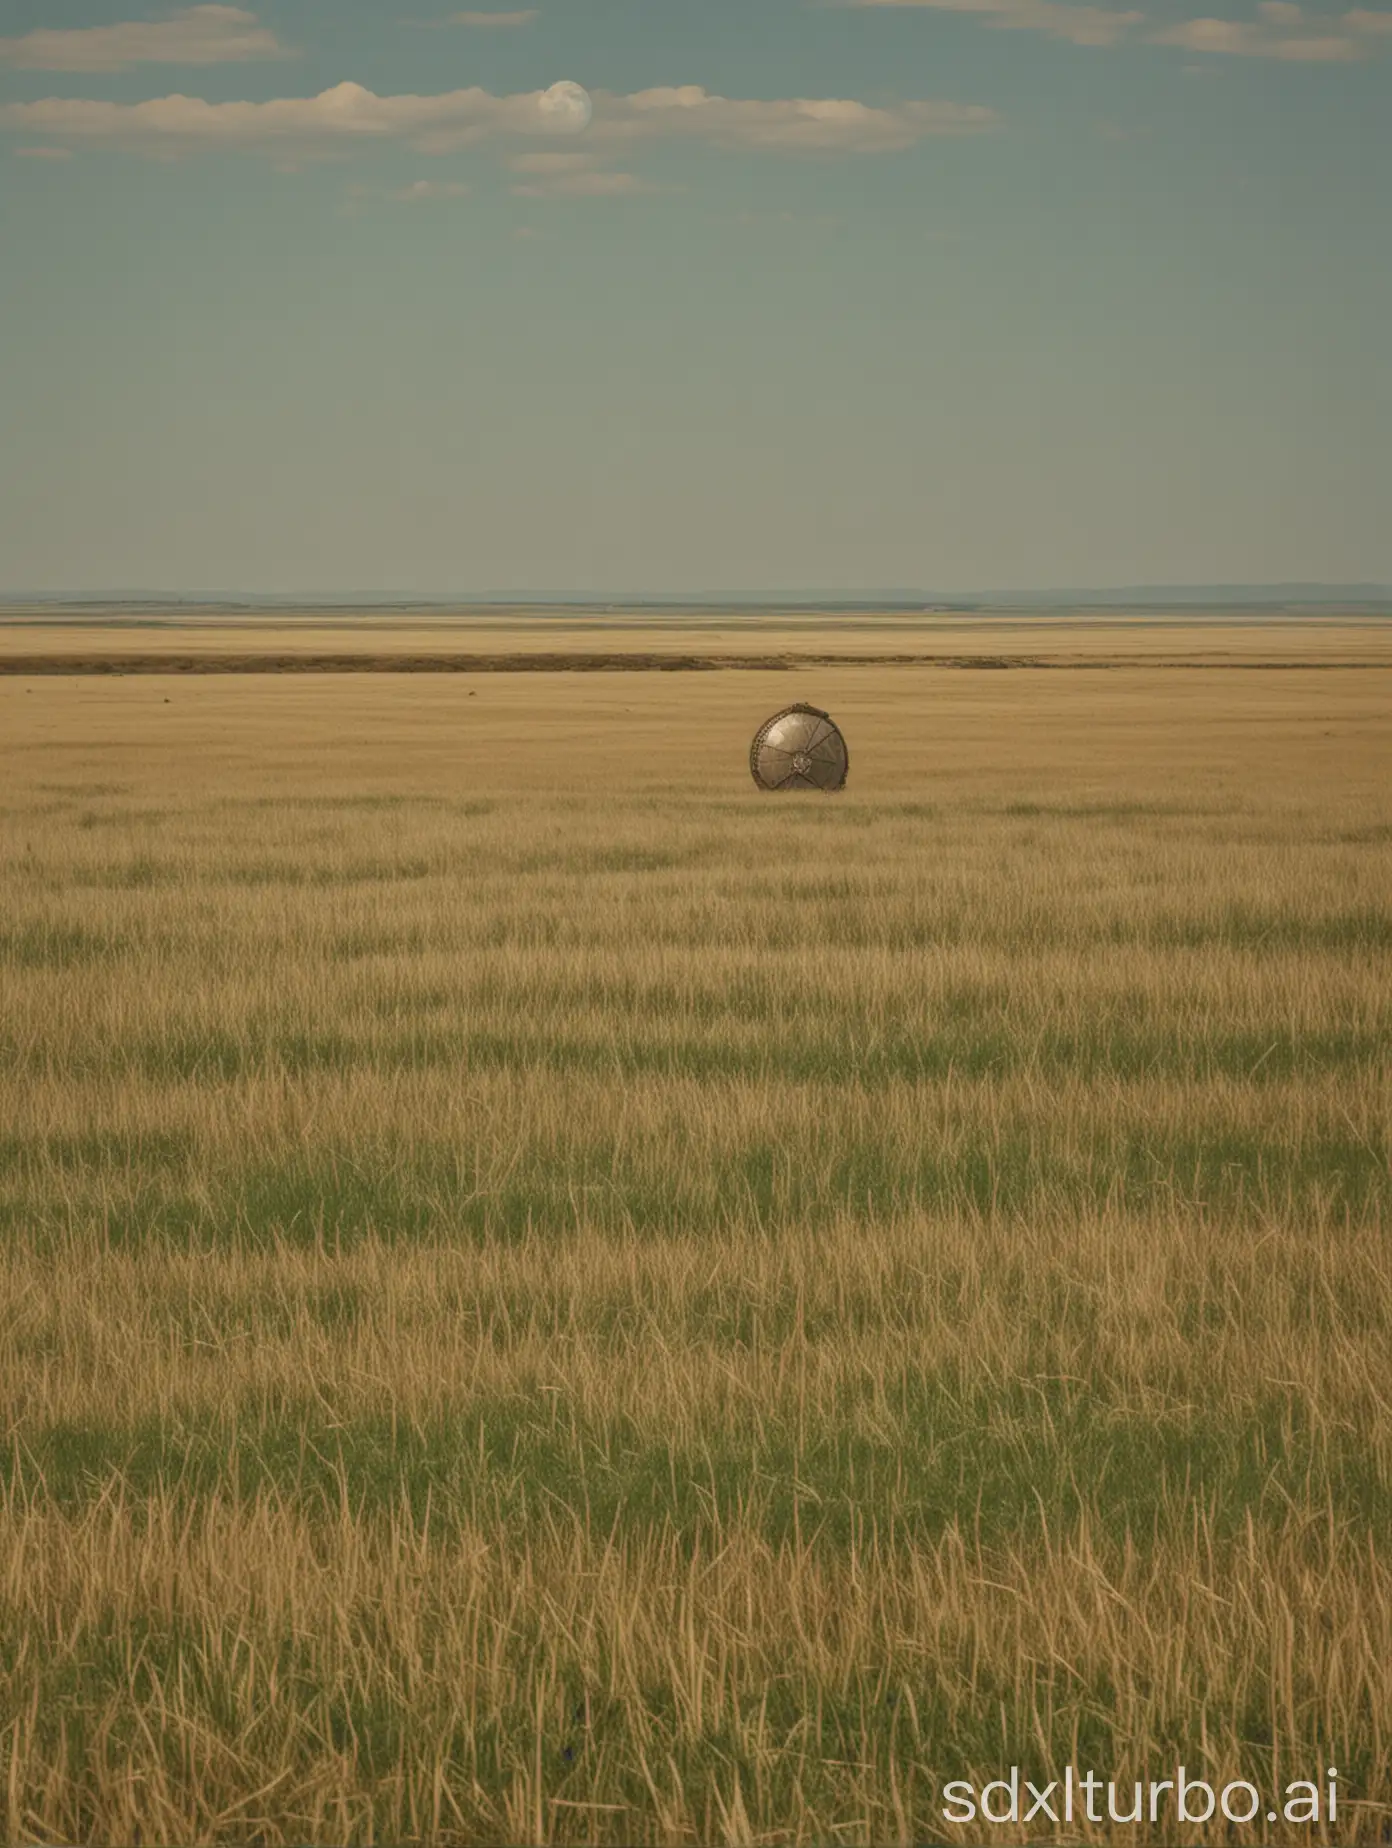 Planet-Visible-on-the-Plains-with-Pentax-55mm-f16-Helios44M-Lens